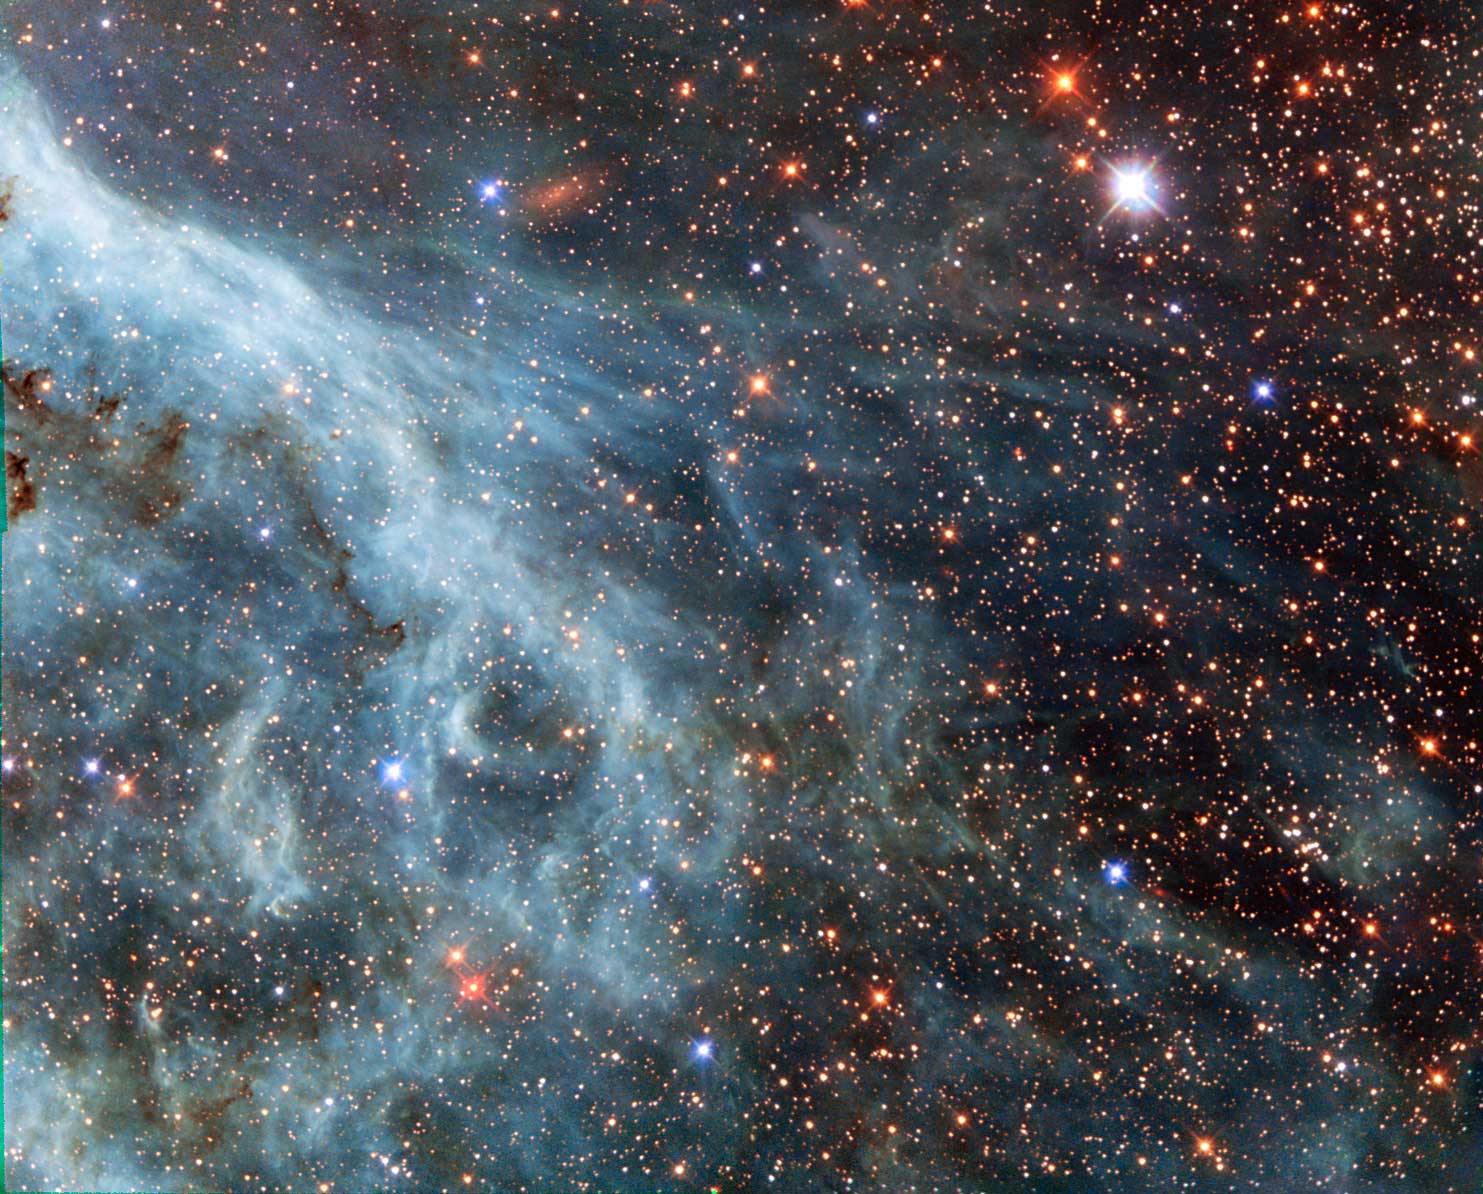 Large Magellanic Cloud:
                              This image shows part of the Large Magellanic Cloud (LMC), a small nearby galaxy that orbits our galaxy, the Milky Way, and appears as a blurred blob in our skies. This data in this image is part of the Archival Pure Parallel Project (APPP), a project that gathered together and processed over 1000 images taken using Hubble’s Wide Field Planetary Camera 2, obtained in parallel with other Hubble instruments. 
                              Image released on Oct. 13, 2014